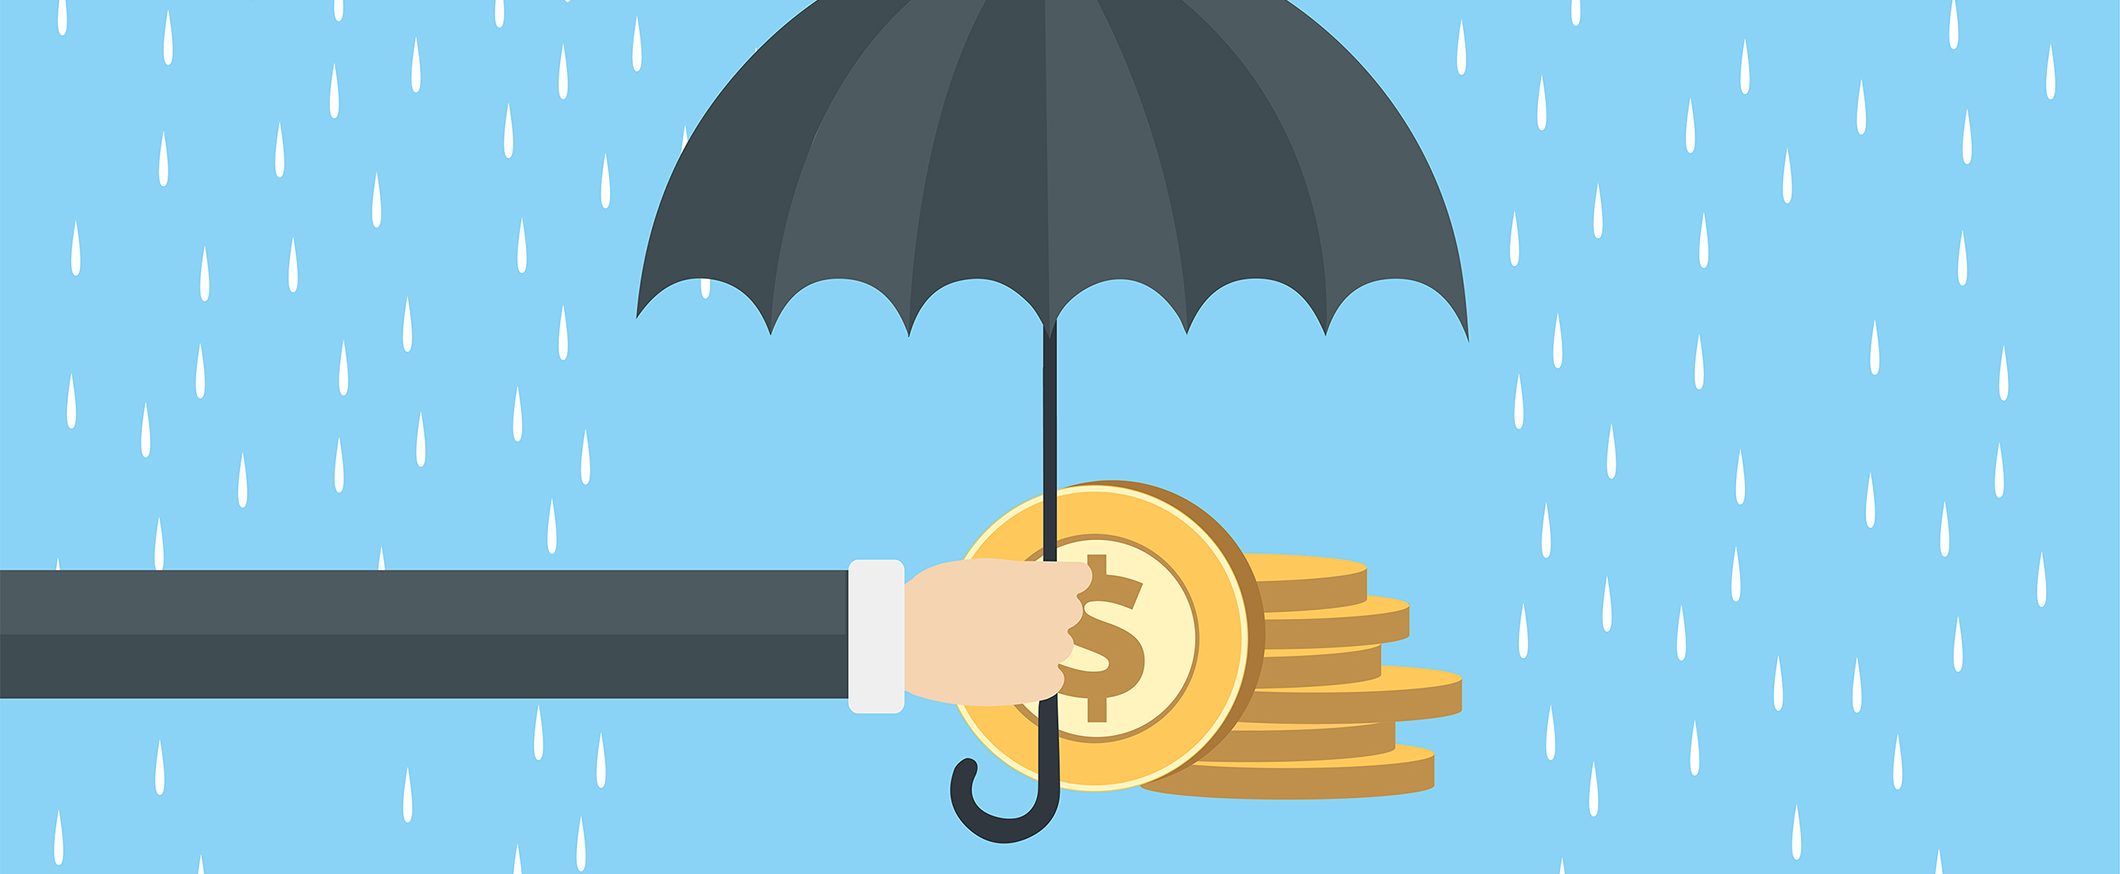 A graphic of a hand holding a black umbrella while rain drops are falling on a blue background. There are also gold coins with the dollar symbol in the background.